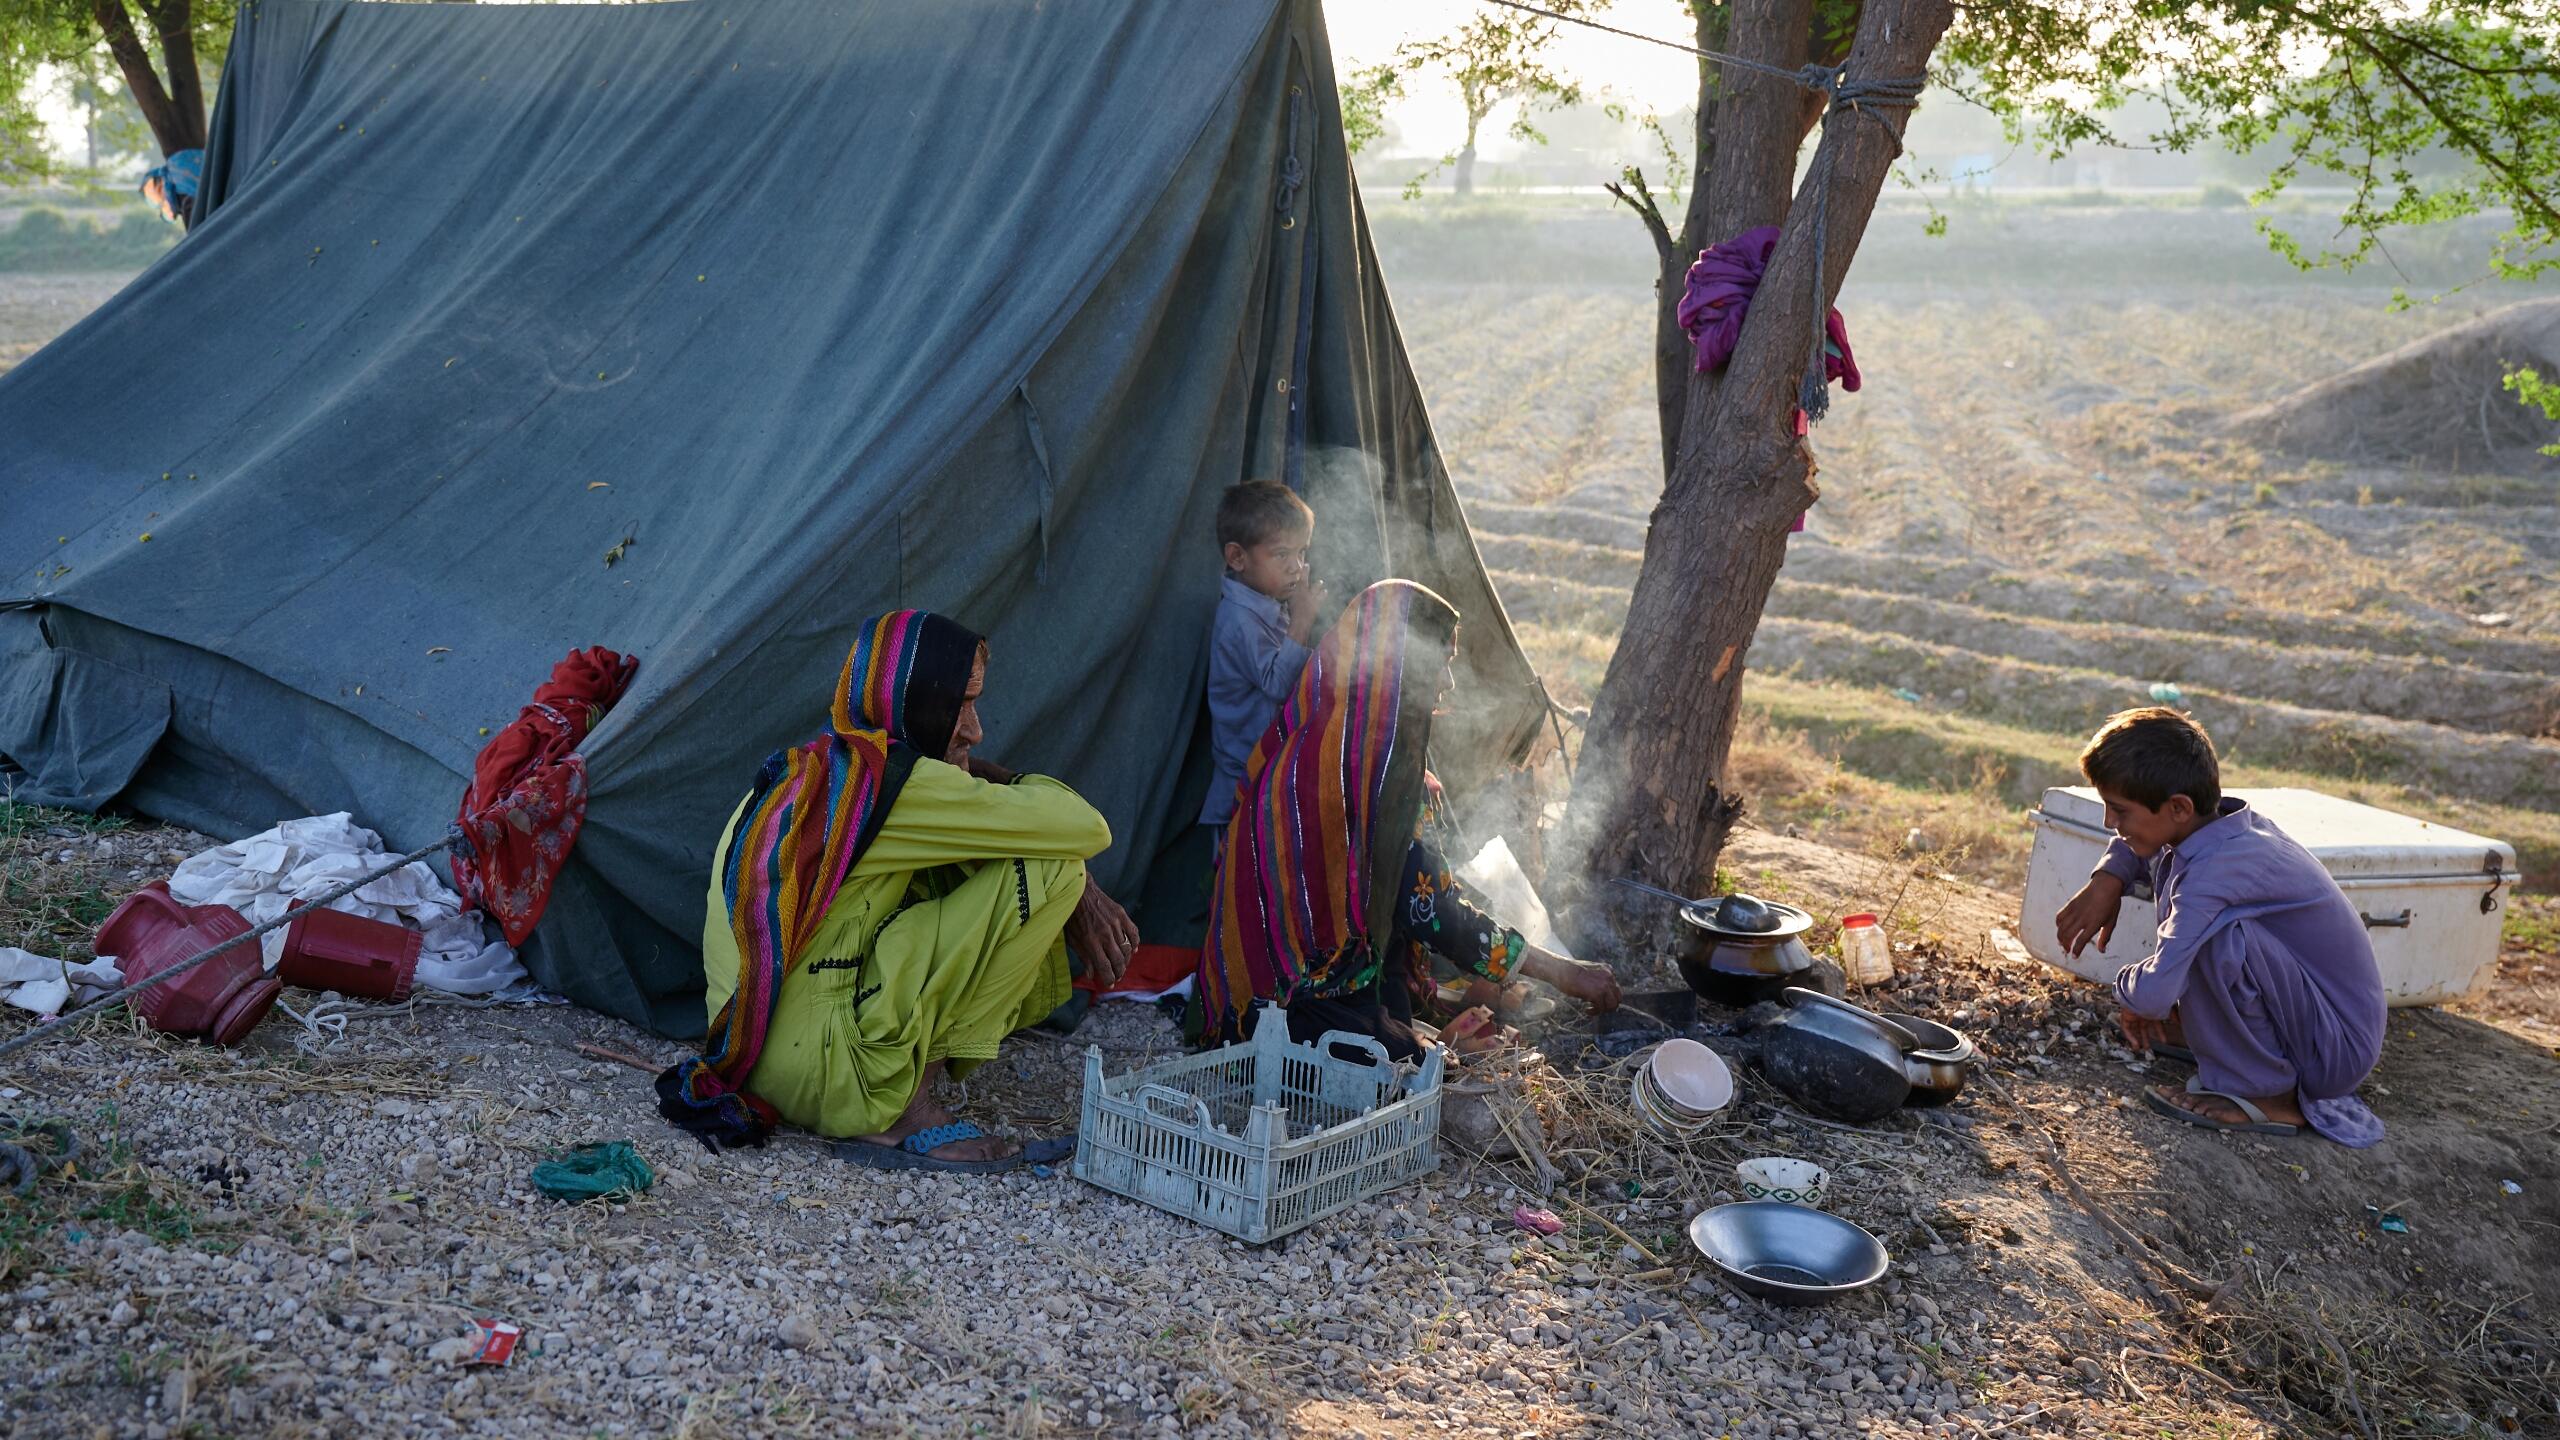 A family cooks by a tent.